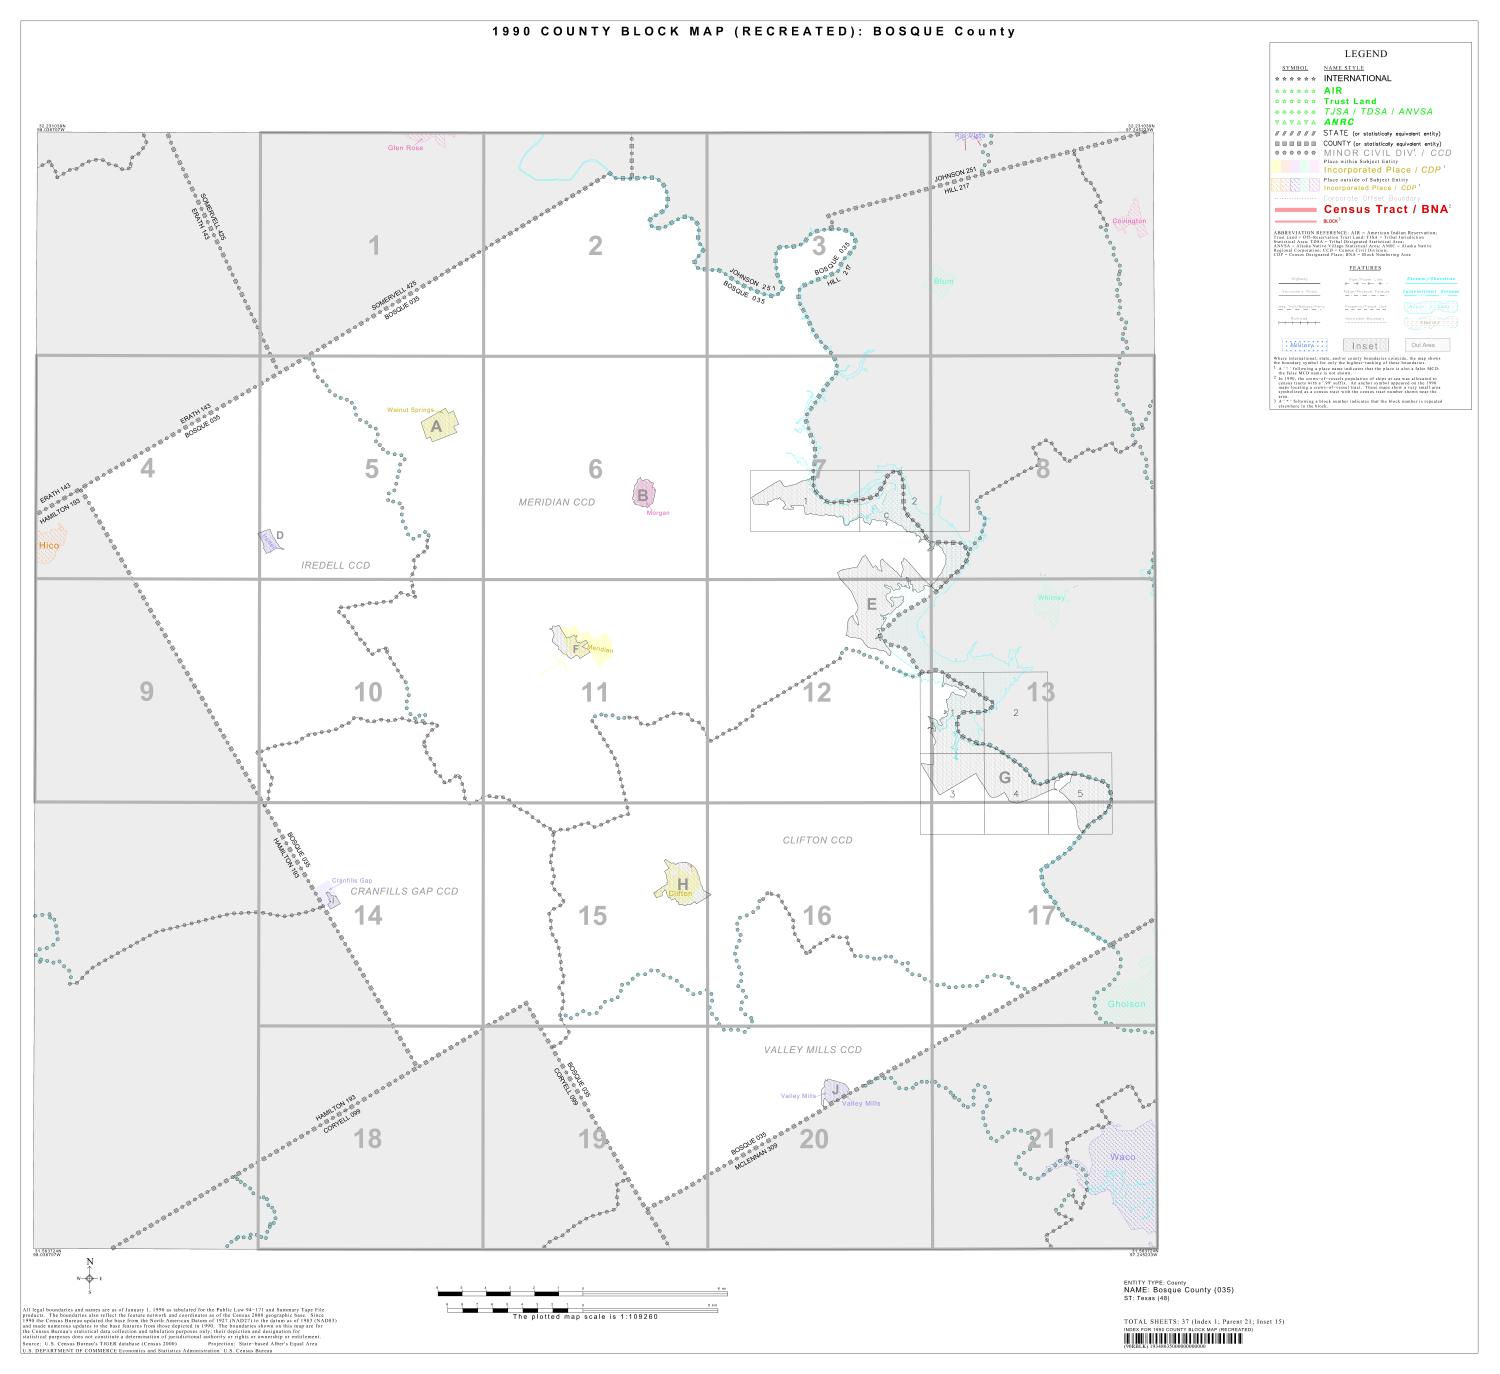 1990 Census County Block Map (Recreated): Bosque County, Index, Index map for Bosque County, Texas showing the distribution of census blocks and smaller inset areas for which the U.S. Census Bureau collected data. The plotted map scale is 1:109,260., 